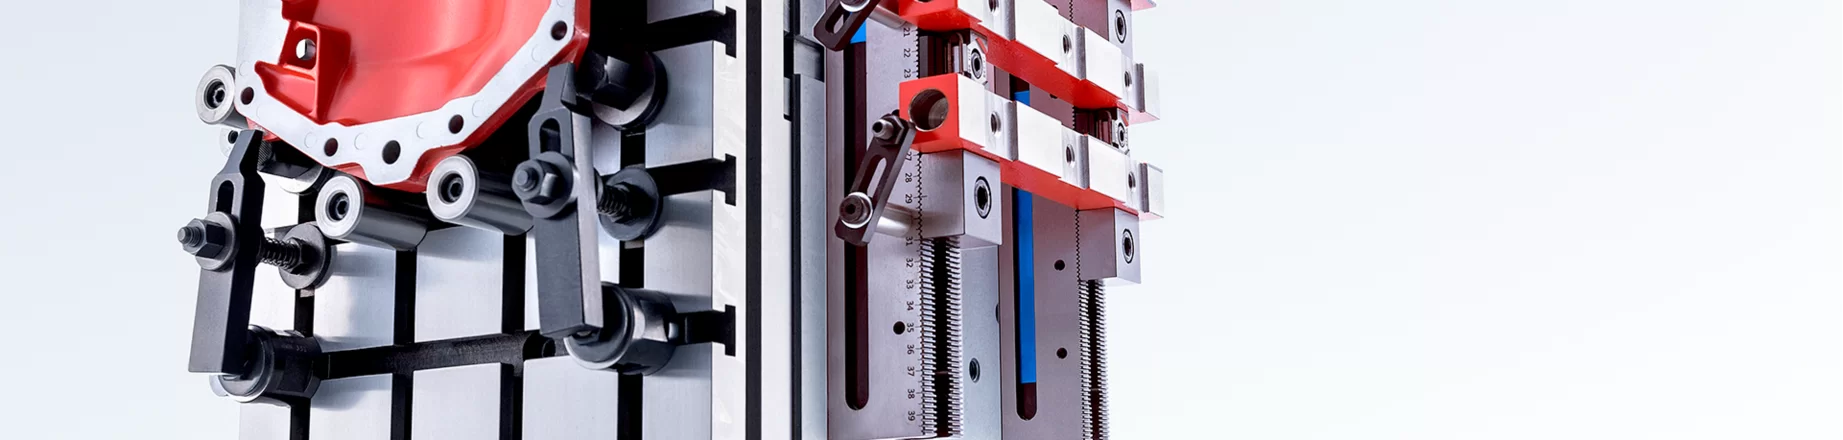 Multiple Clamping Systems
 IM0009198 Foto Banner